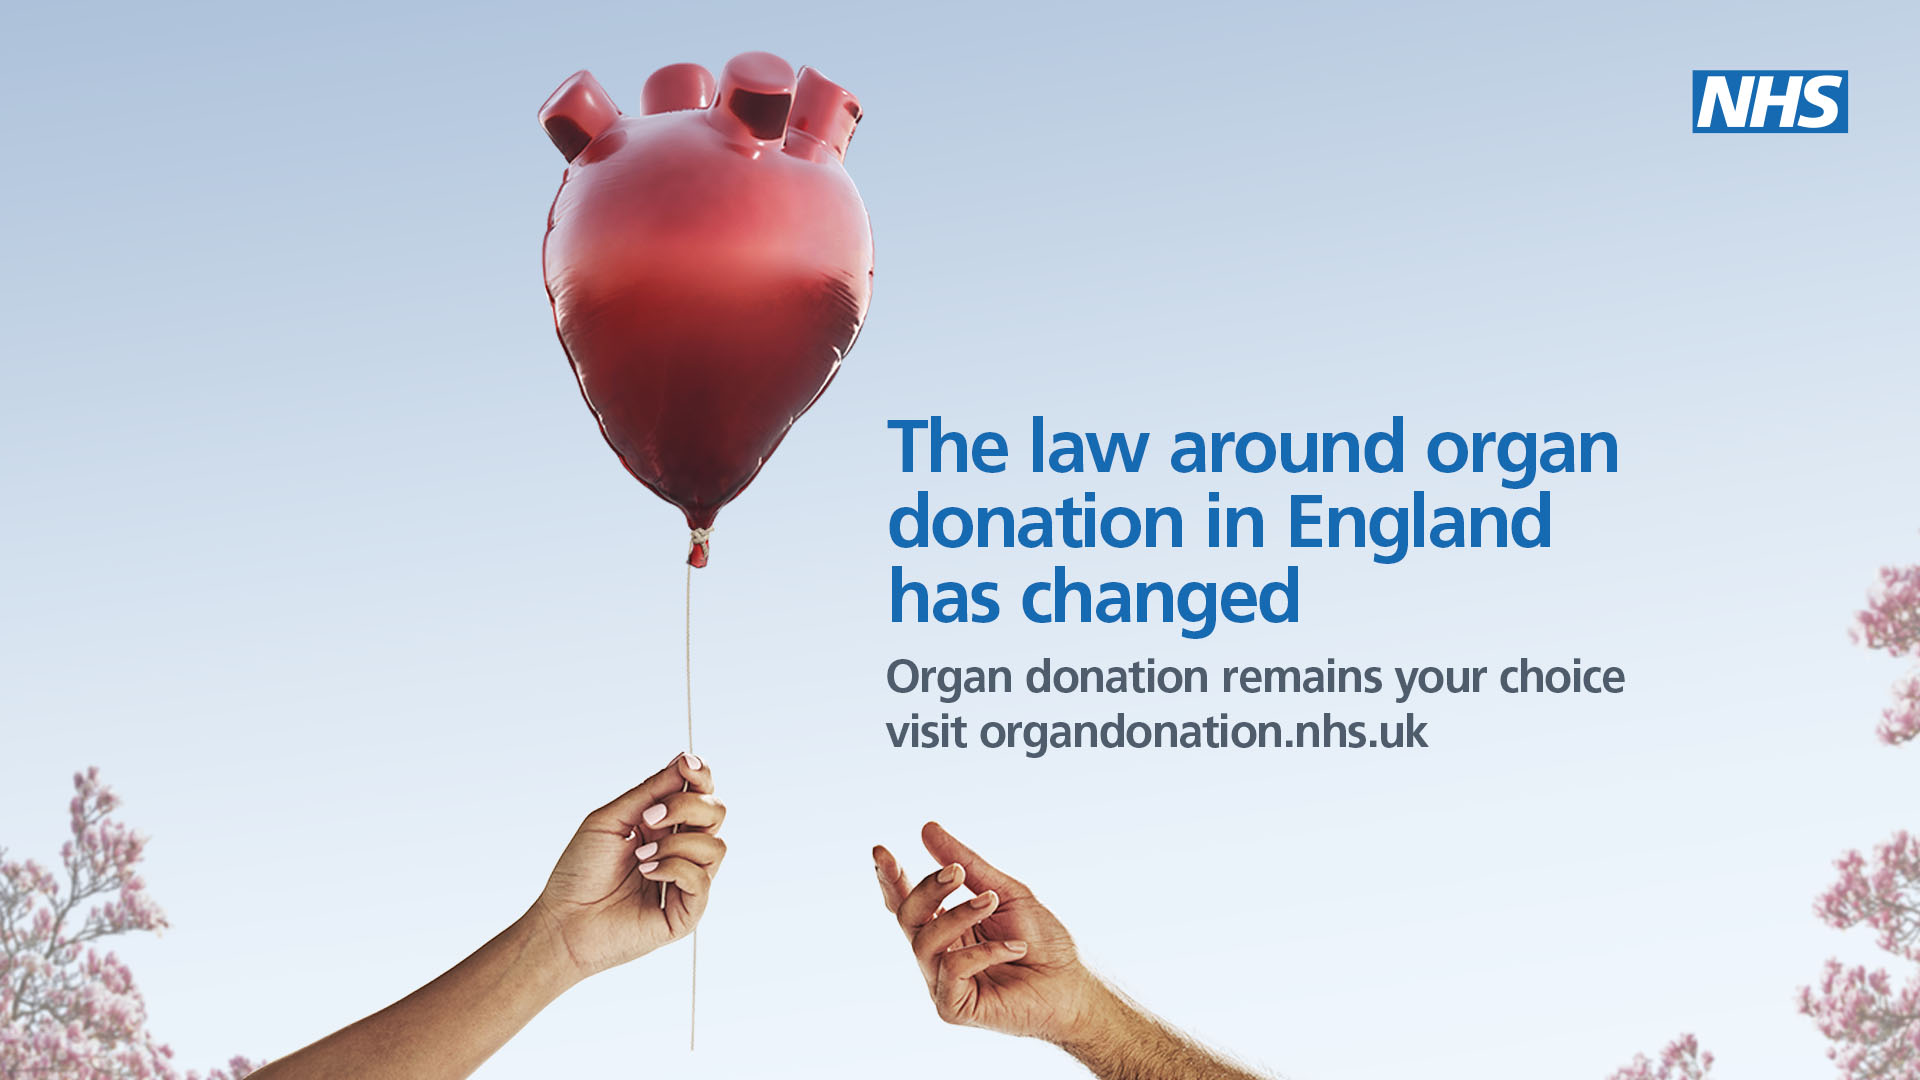 The law around organ donation in England has changed.  Organ donation remains your choice visit organdonation.org.uk